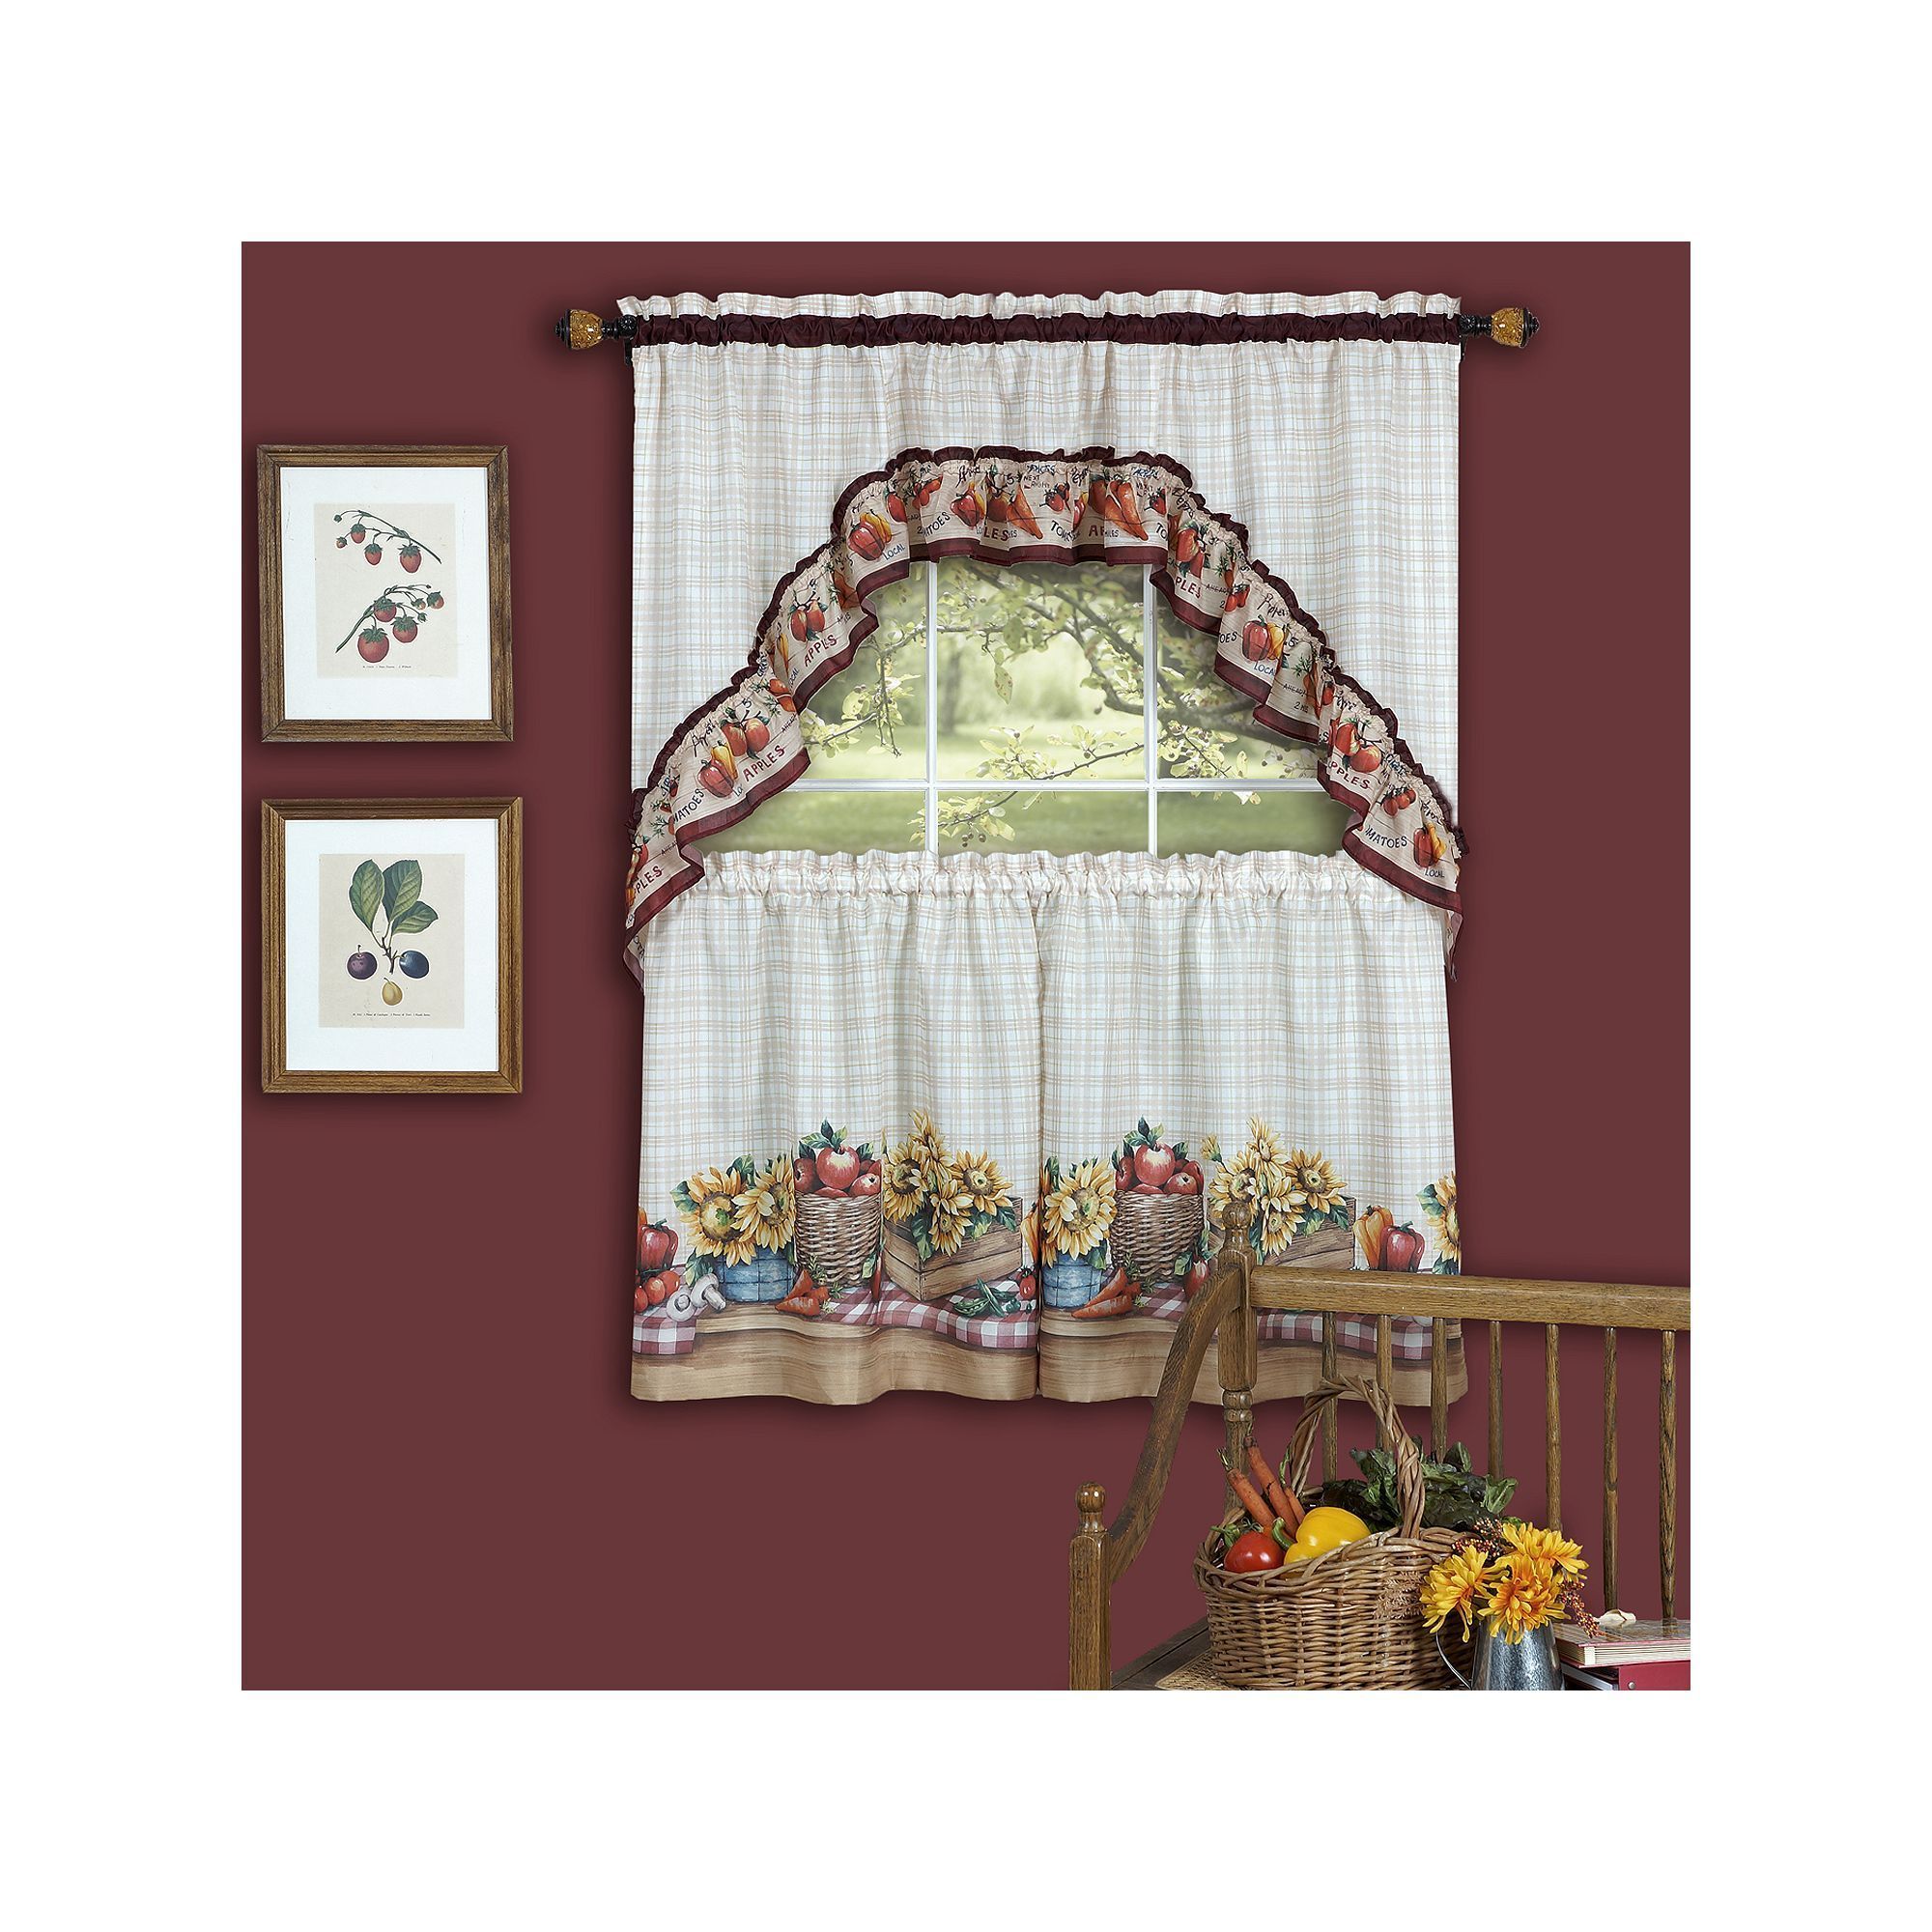 Farmer's Market 3 Piece Swag Tier Kitchen Window Curtain Set Within Window Curtains Sets With Colorful Marketplace Vegetable And Sunflower Print (View 4 of 20)